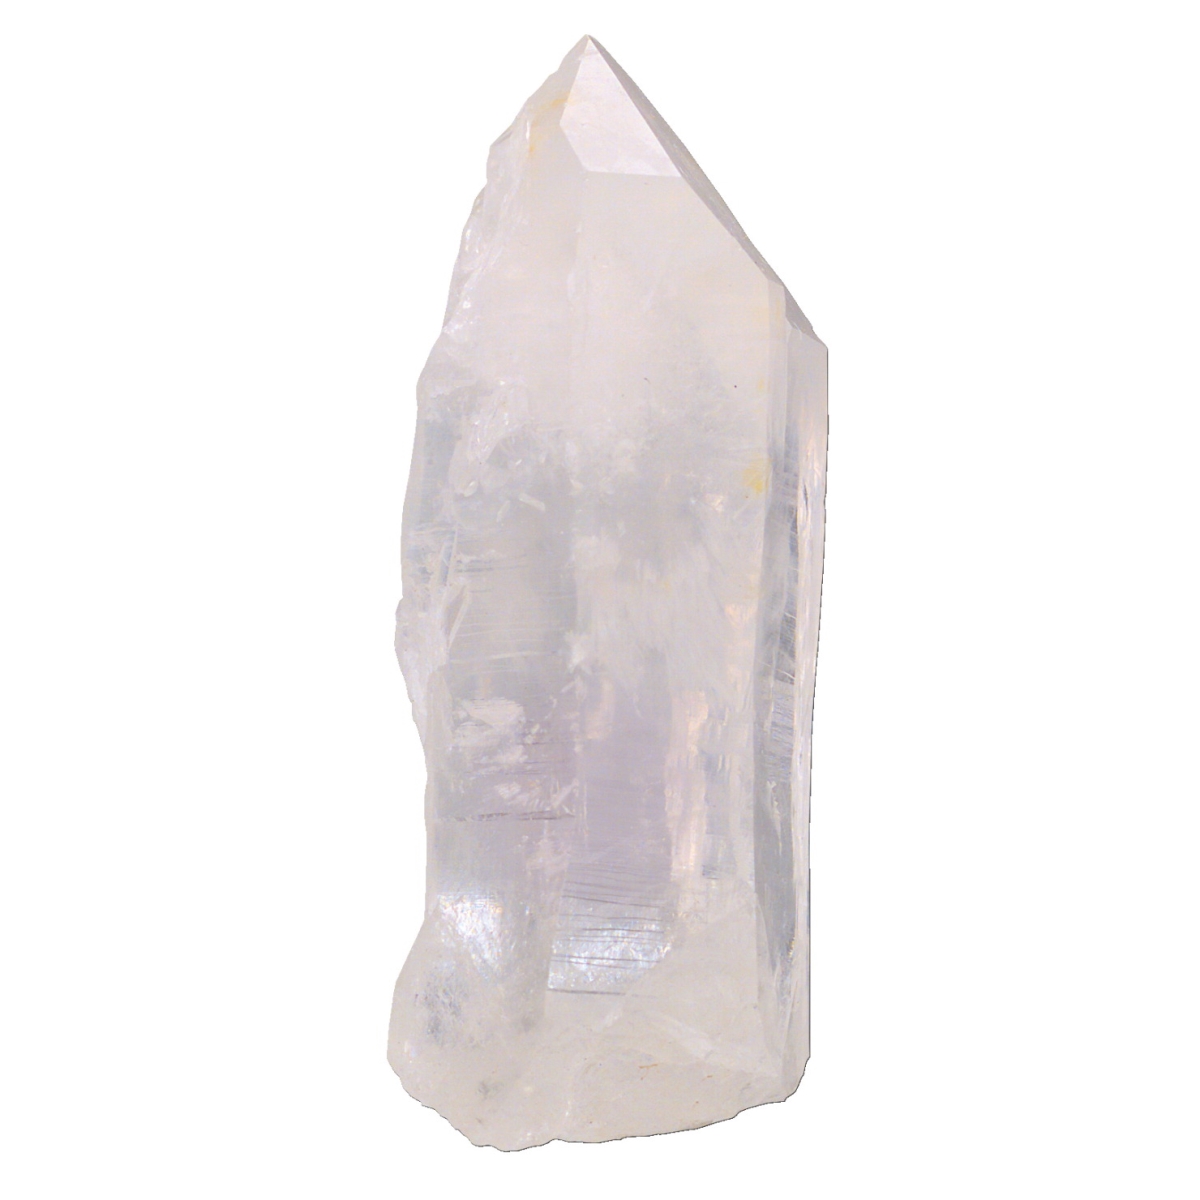 587326 Scott Resources Student Clear Rock Crystal Quartz - Pack Of 10